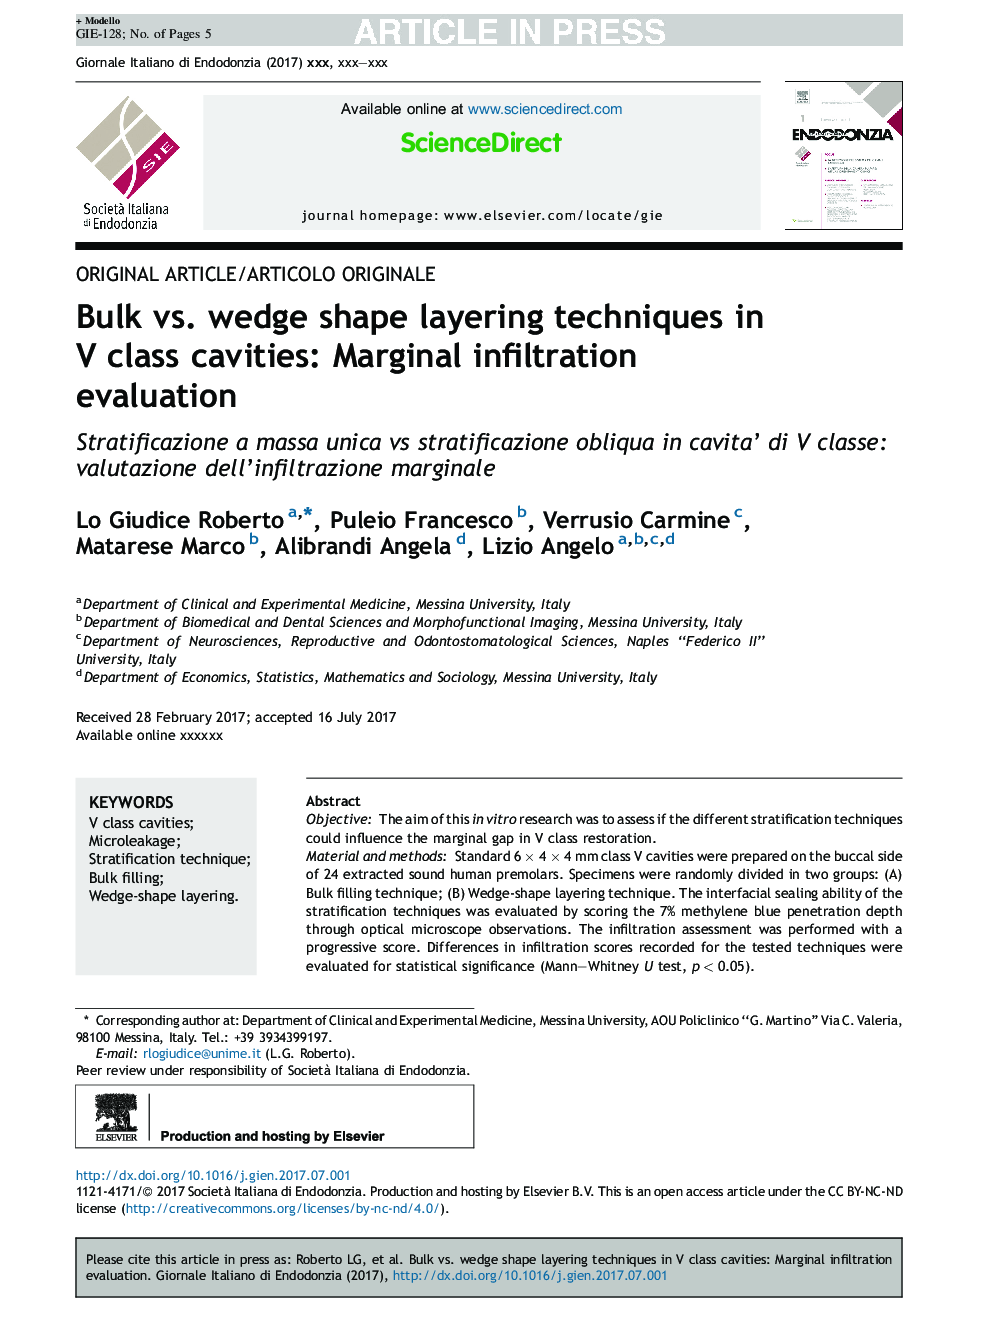 Bulk vs wedge shape layering techniques in V class cavities: marginal infiltration evaluation